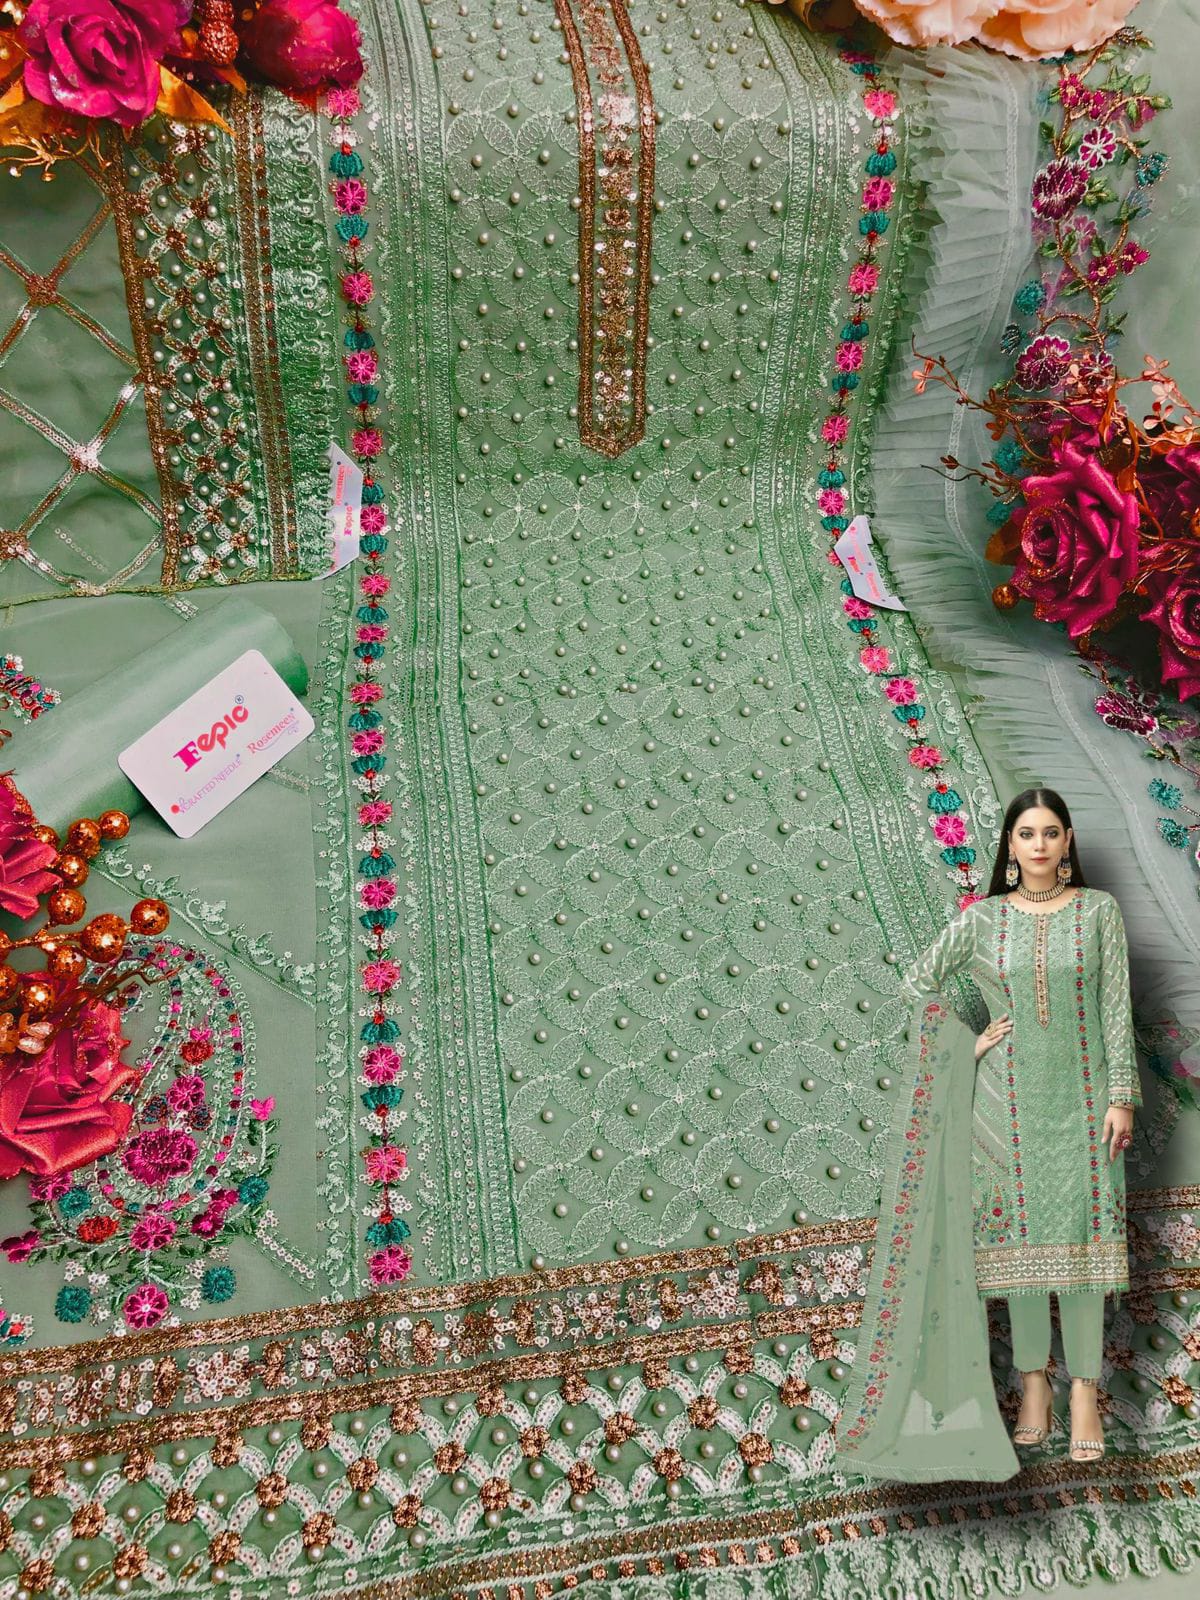 FEPIC ROSEMEEN D.NO. D-5212 DESIGNER SUIT Anant Tex Exports Private Limited